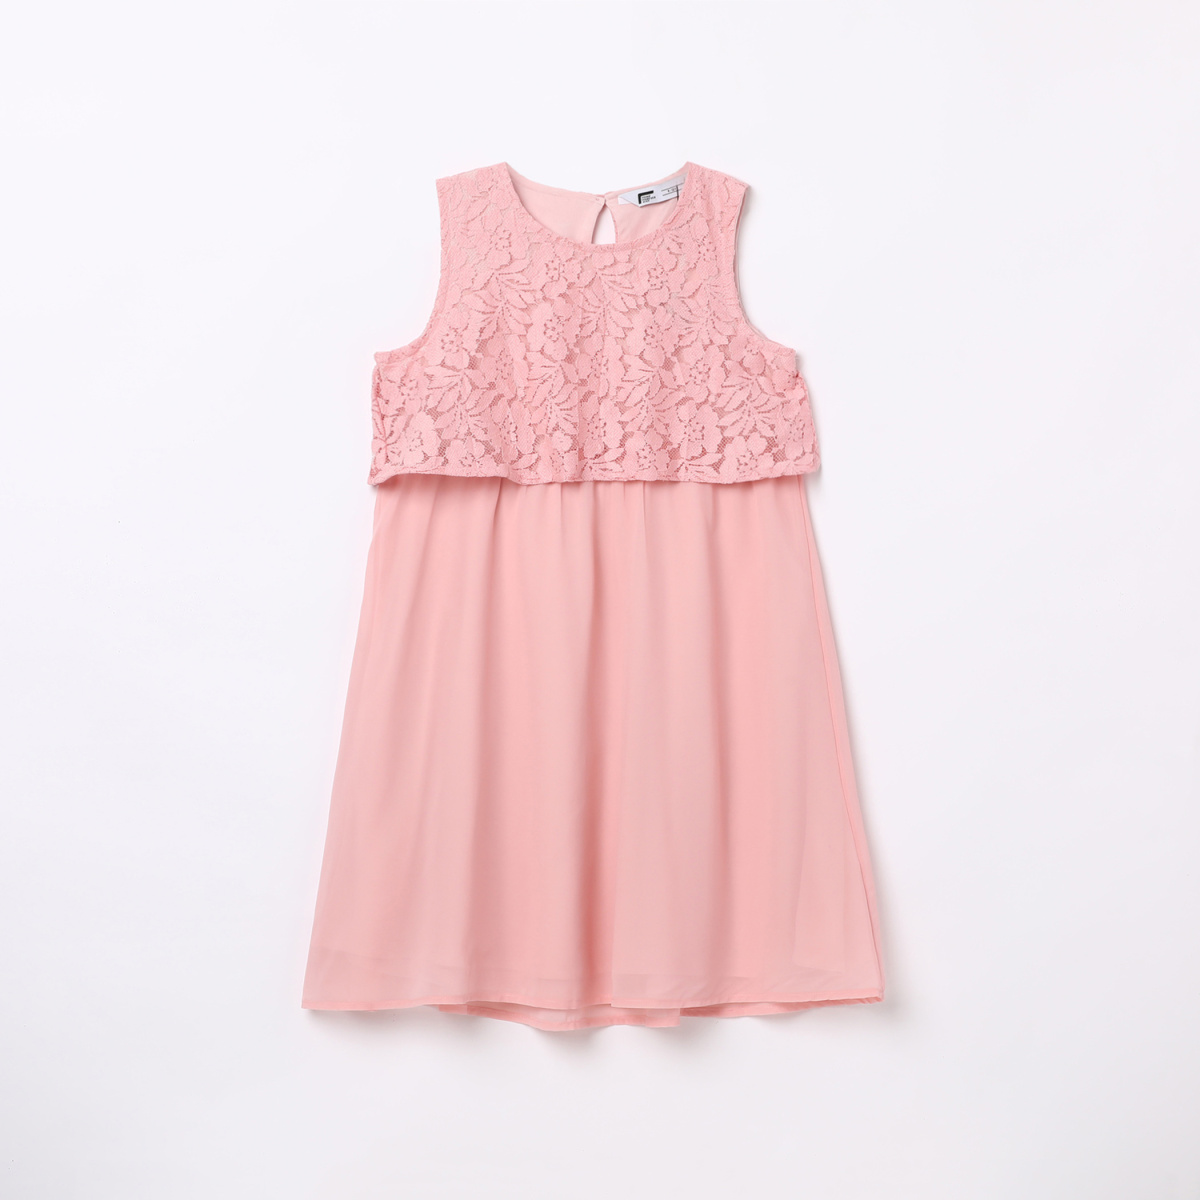 FAME FOREVER YOUNG Girls Textured Lace-Detail A-line Dress